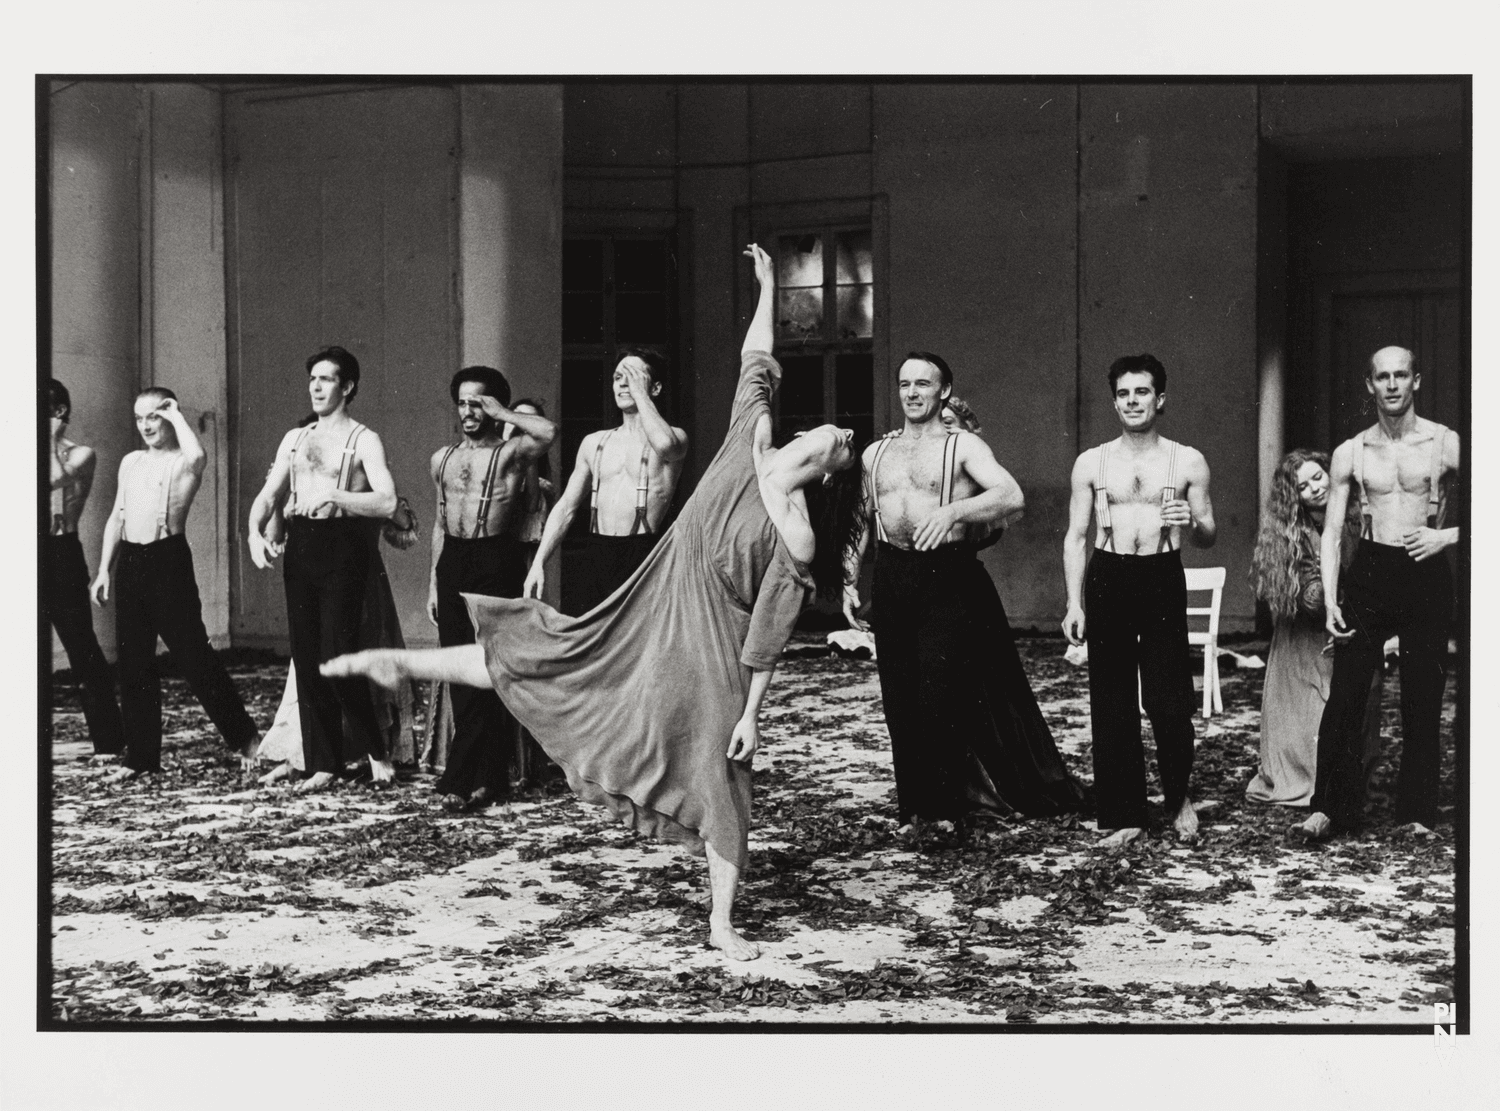 “Bluebeard. While Listening to a Tape Recording of Béla Bartók's Opera "Duke Bluebeard's Castle"” by Pina Bausch